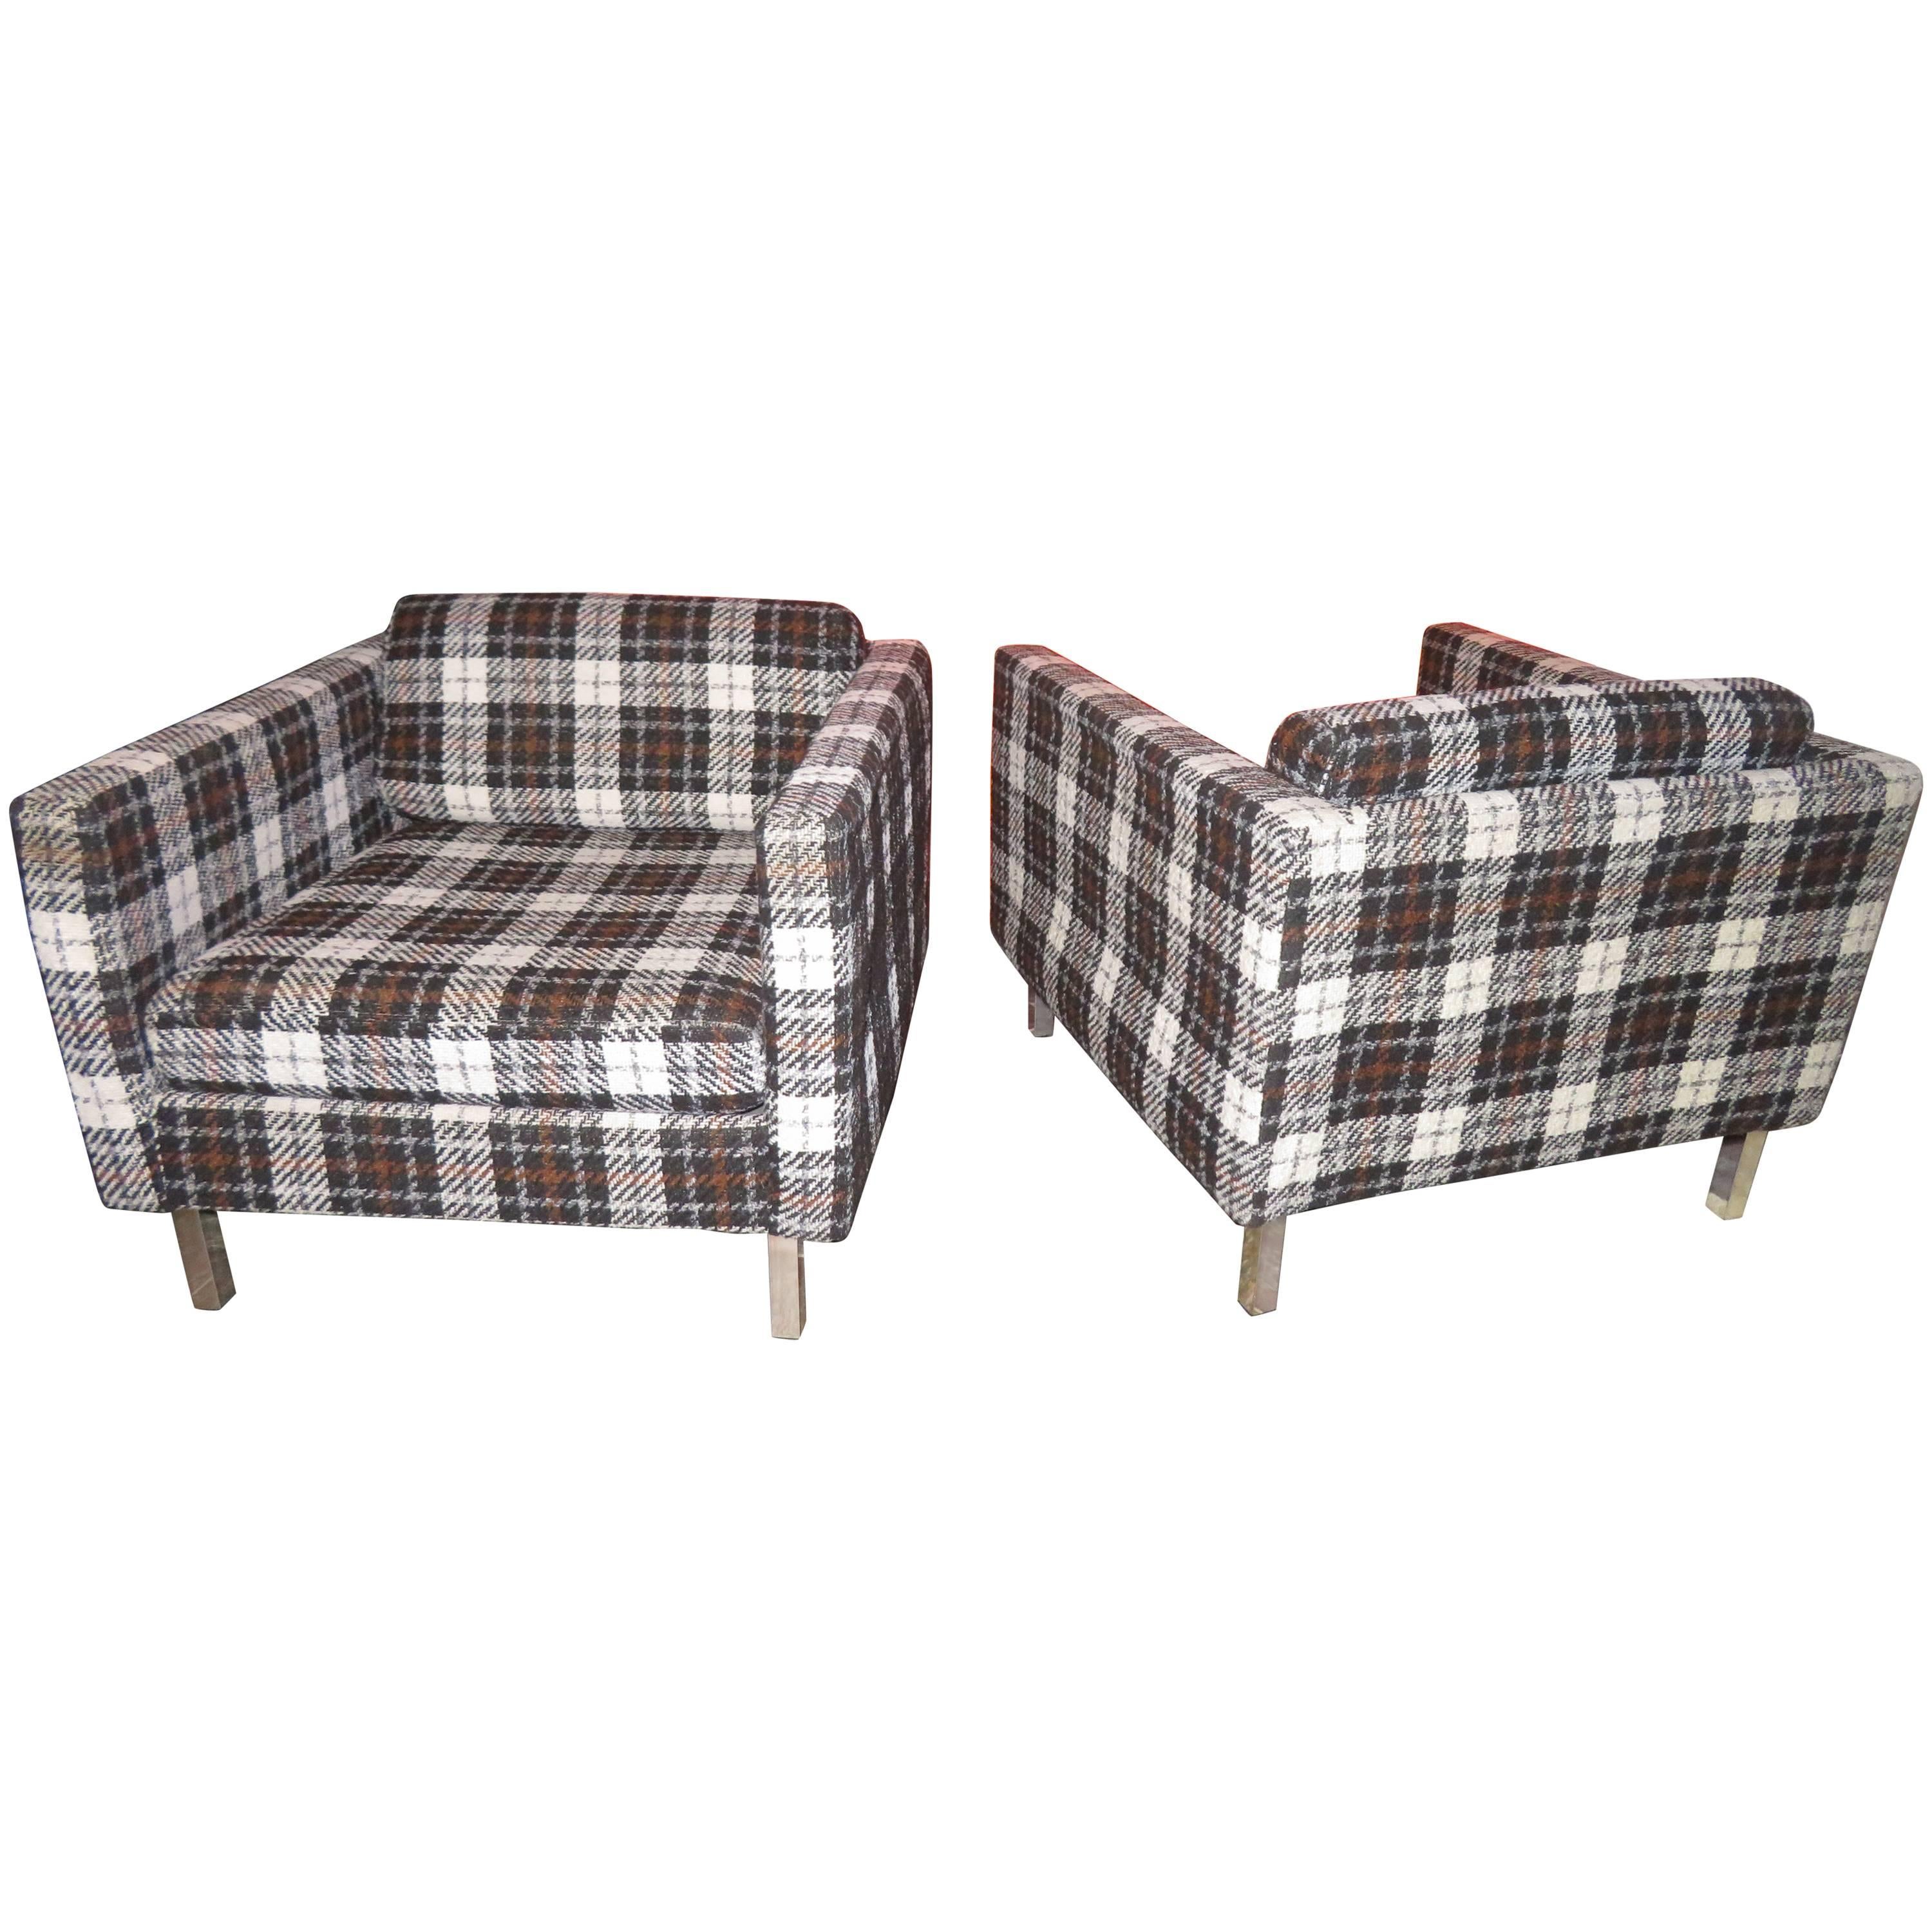 Handsome Pair of Milo Baughman Style Plaid Chrome Cube Lounge Chairs